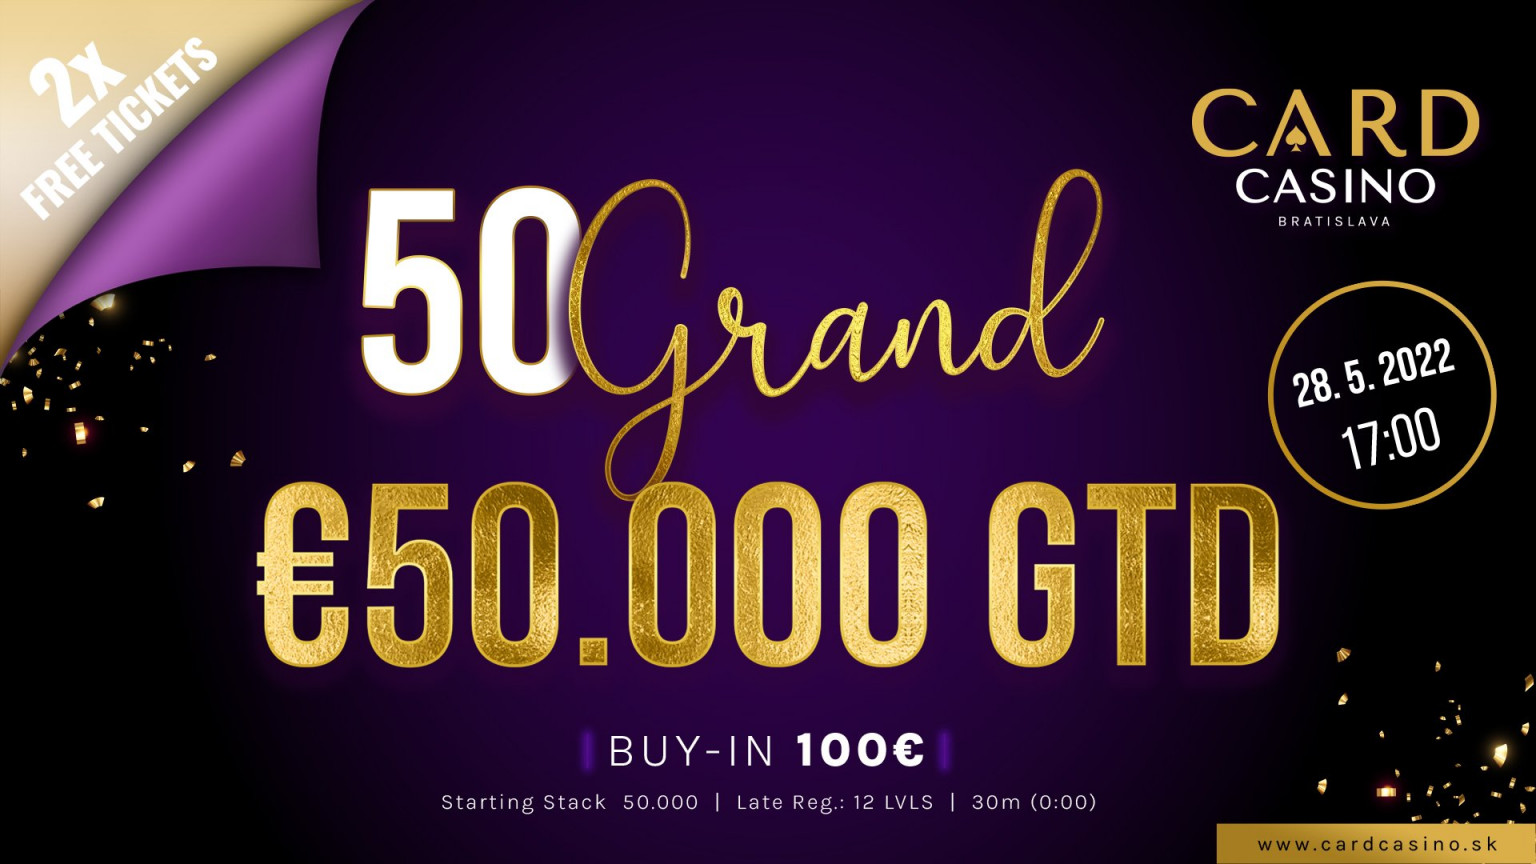 Everyone needs to be here! Get ready for a one-day race with €50,000 GTD. GIWEAVAY on Facebook